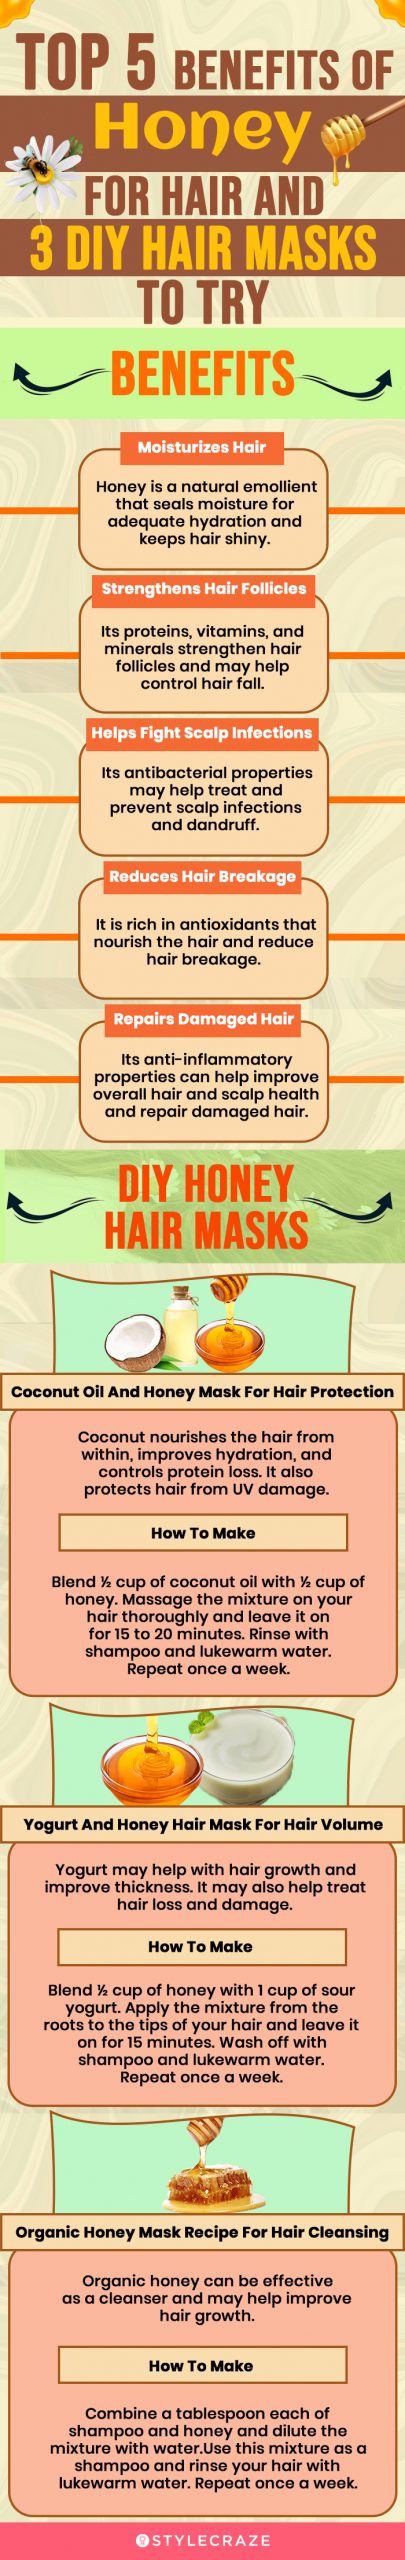 top 5 benefits of honey for hair and 3 diy hair masks to try (infographic)